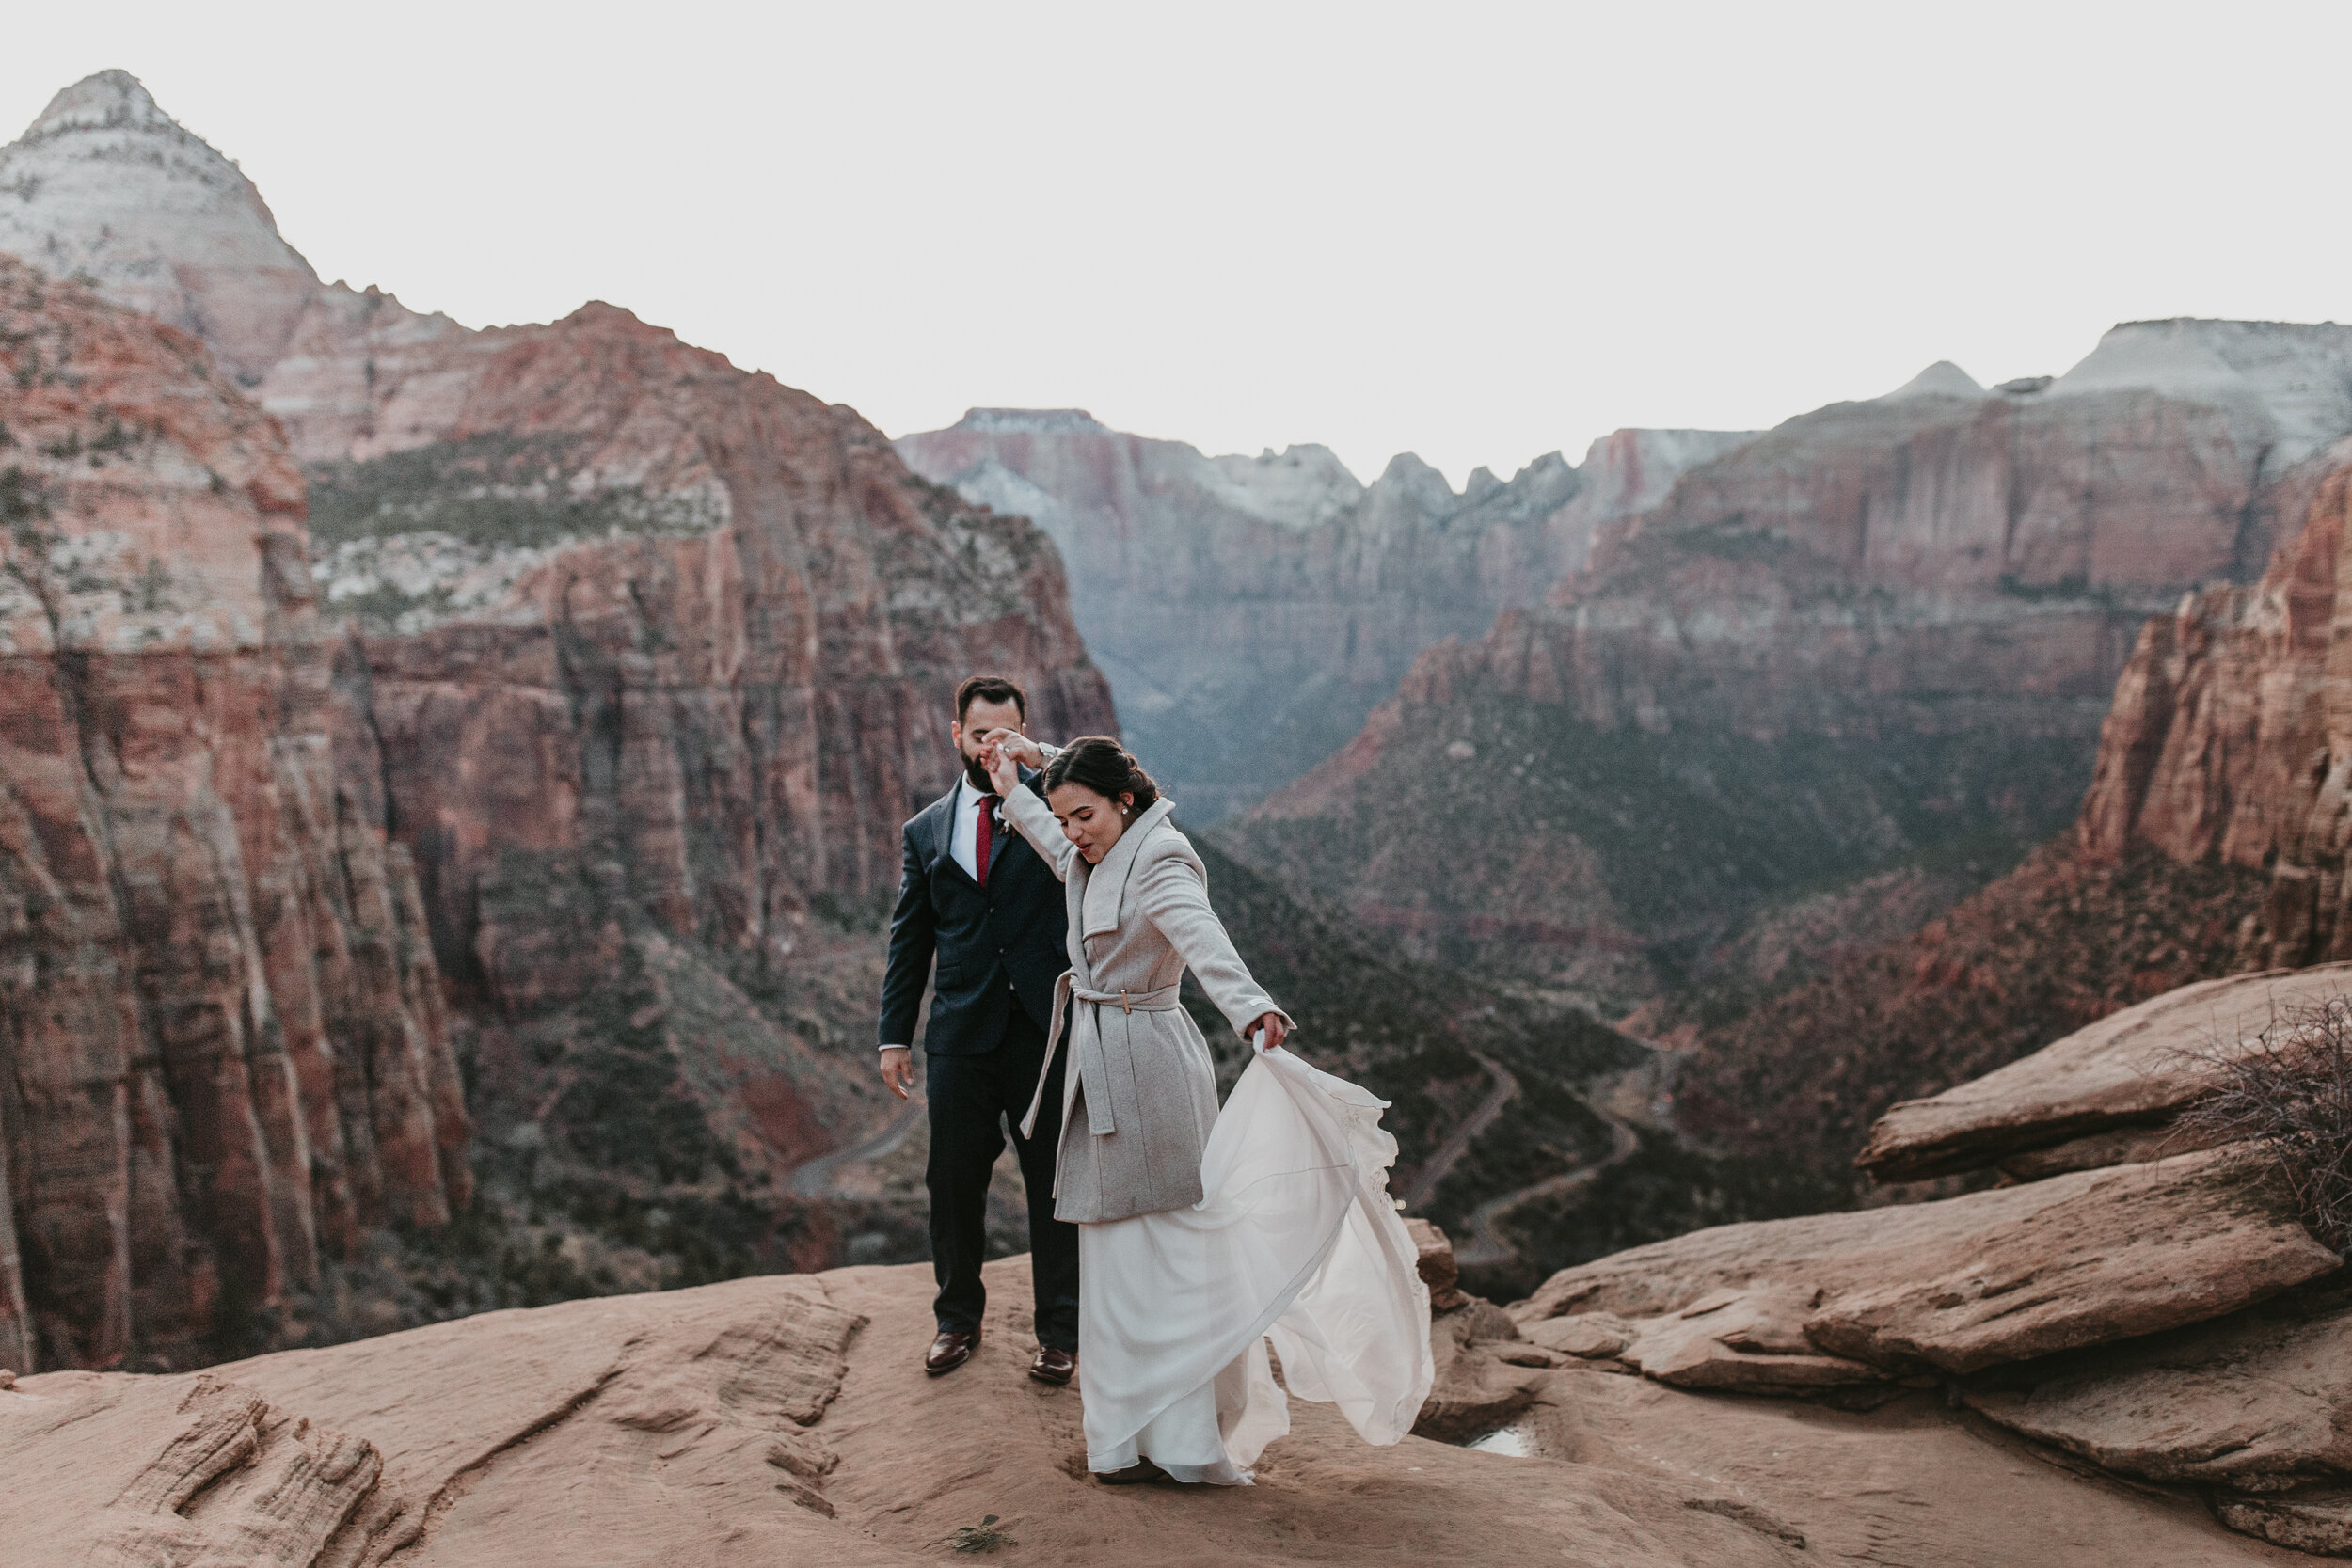 Nicole-Daacke-Photography-snowy-hiking-elopement-in-zion-national-park-zion-elopement-photographer-canyon-overlook-trial-brial-portraits-in-mt-zion-national-park-utah-desert-adventure-elopement-photographer-176.jpg